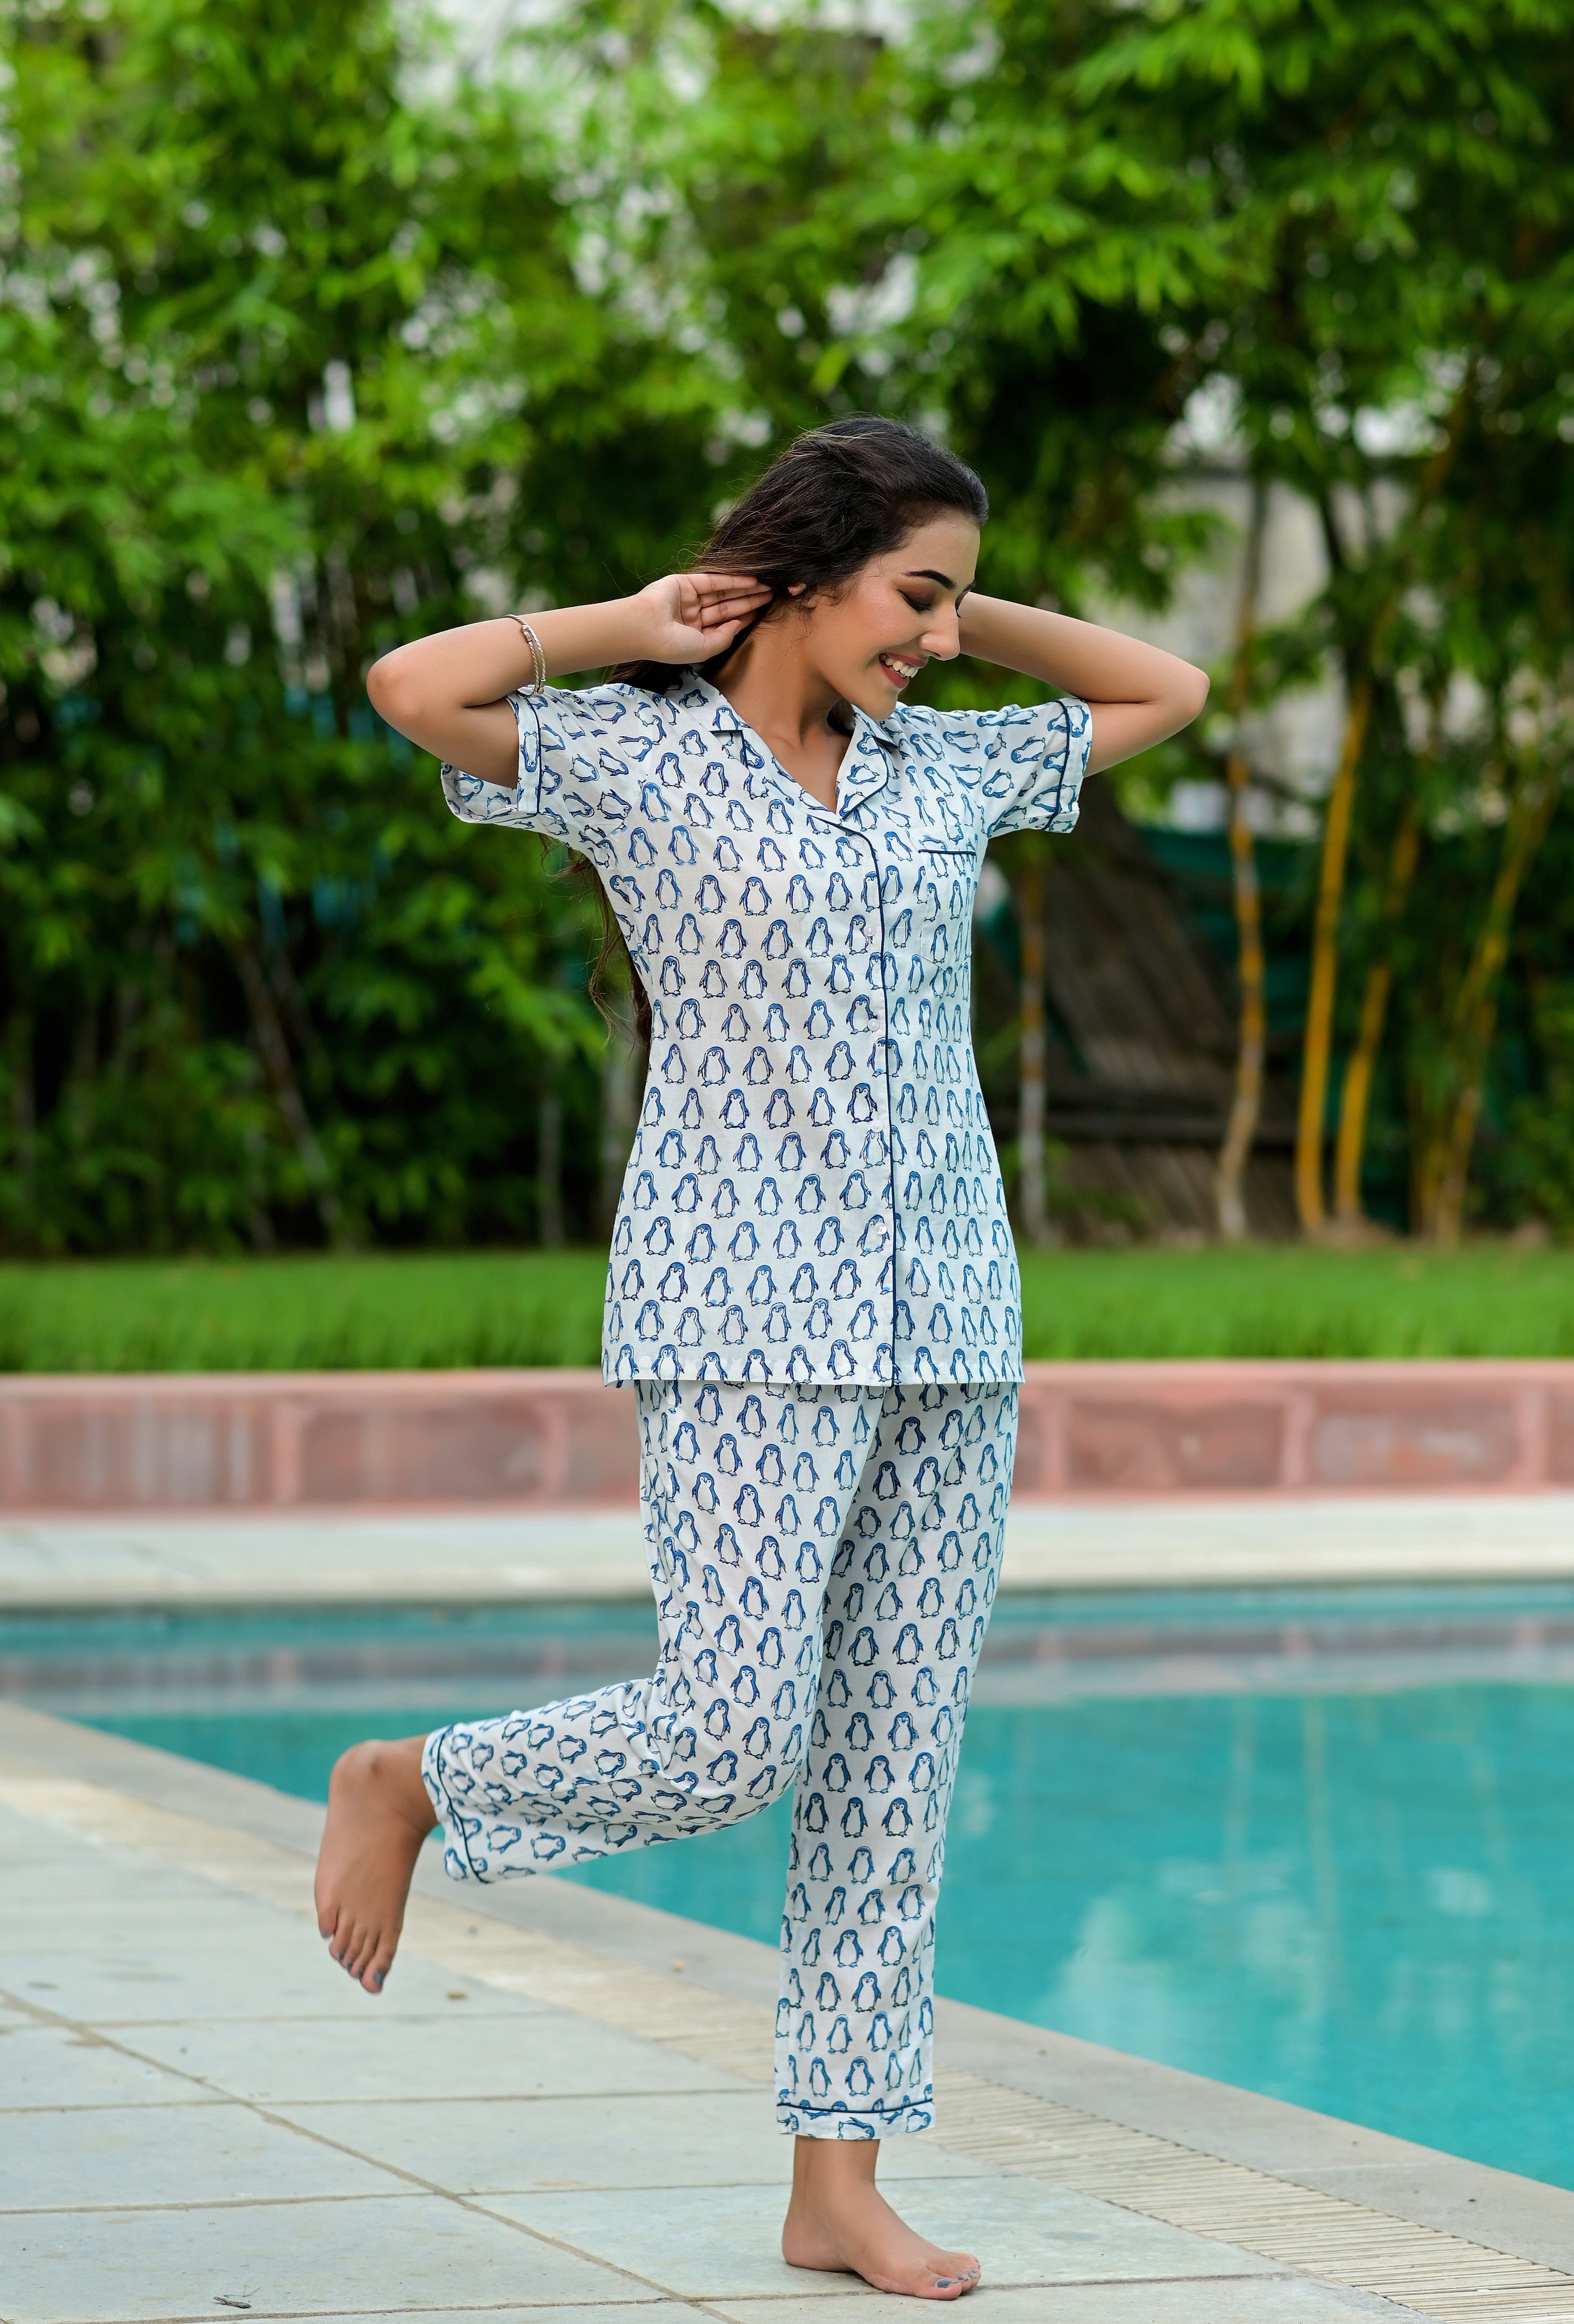 Shop Printed Night Suits for Women Online at best prices